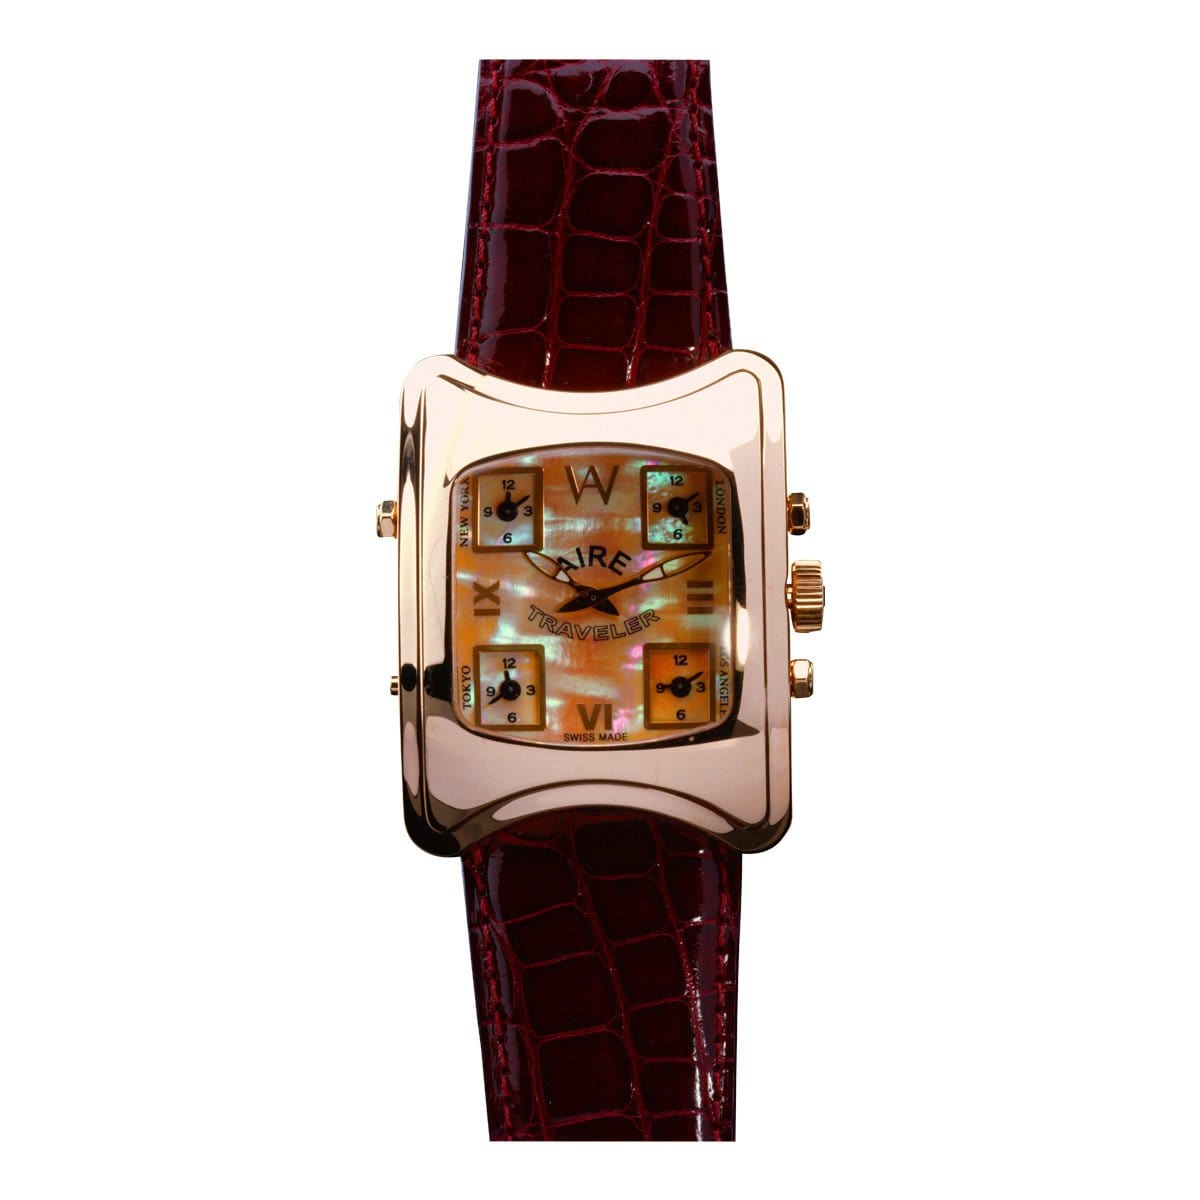 MEN'S WATCH - AIRE TRAVELER 5 TIME ZONES - Chris Aire Fine Jewelry & Timepieces